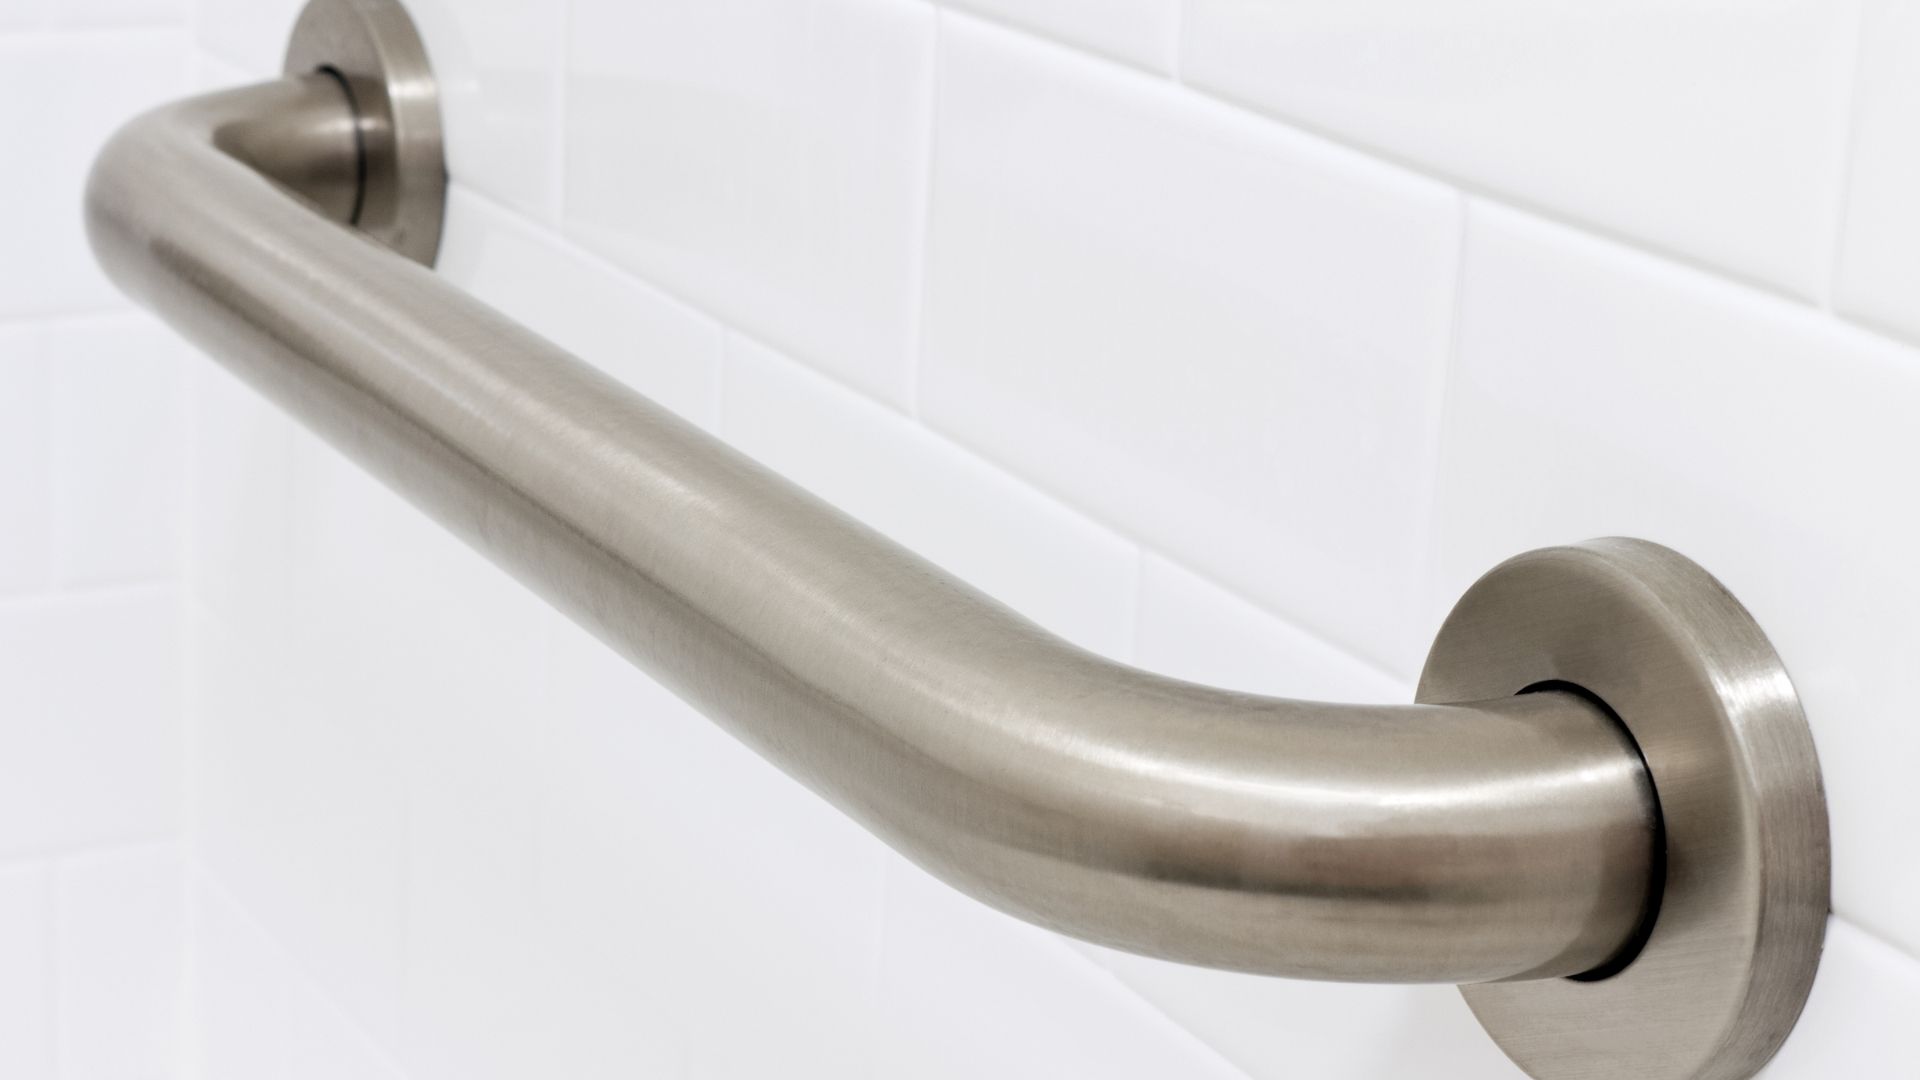 Installation of grab bars, particularly for plumbers.